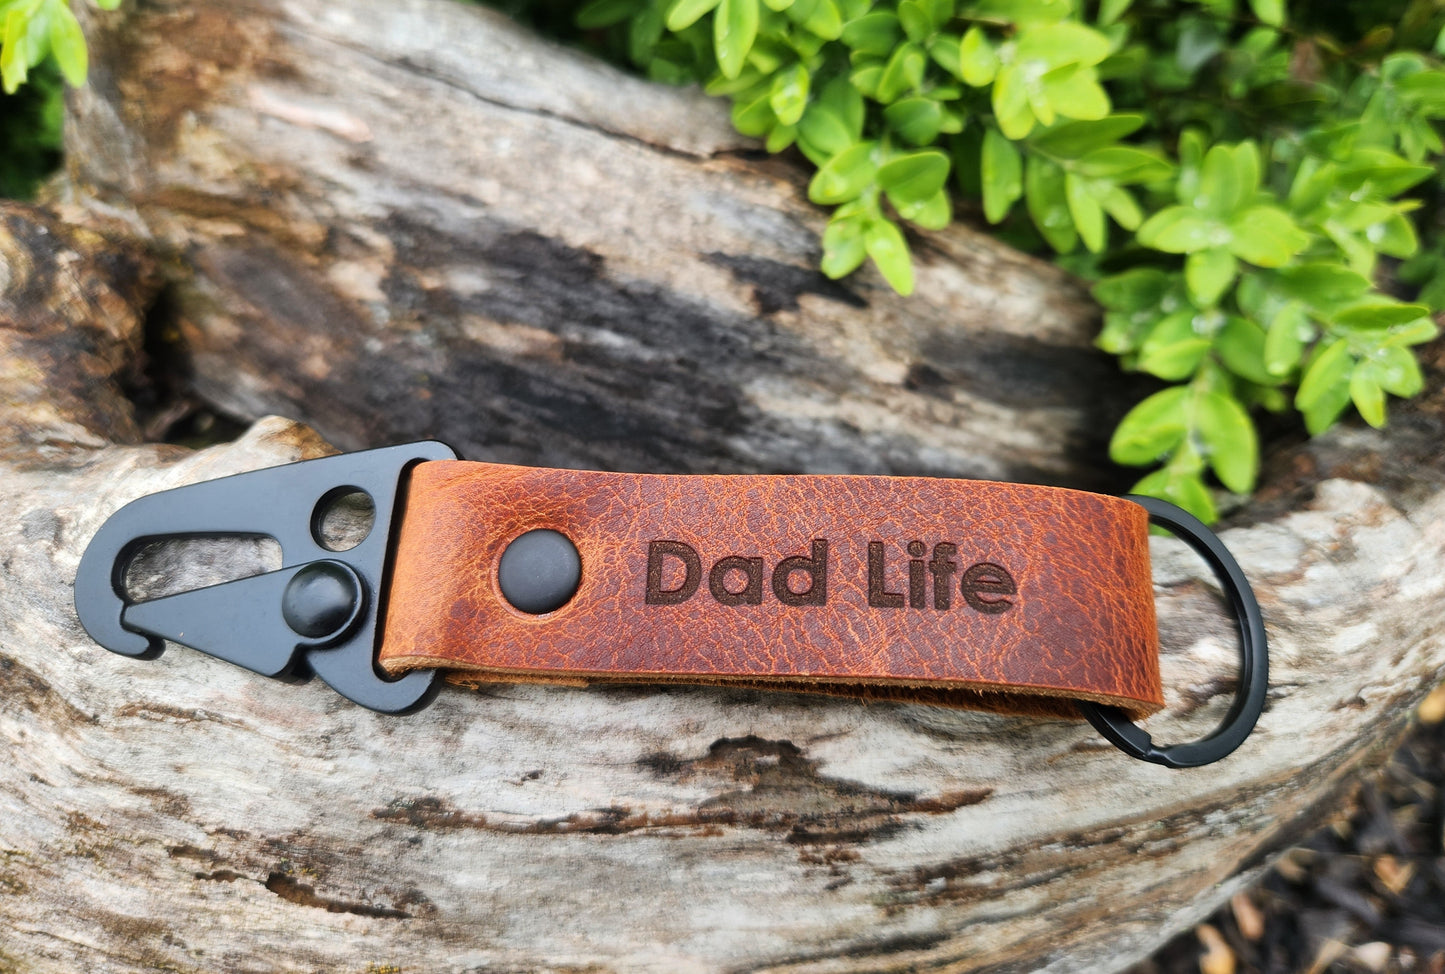 DAD LIFE leather key ring with HK hook & ring